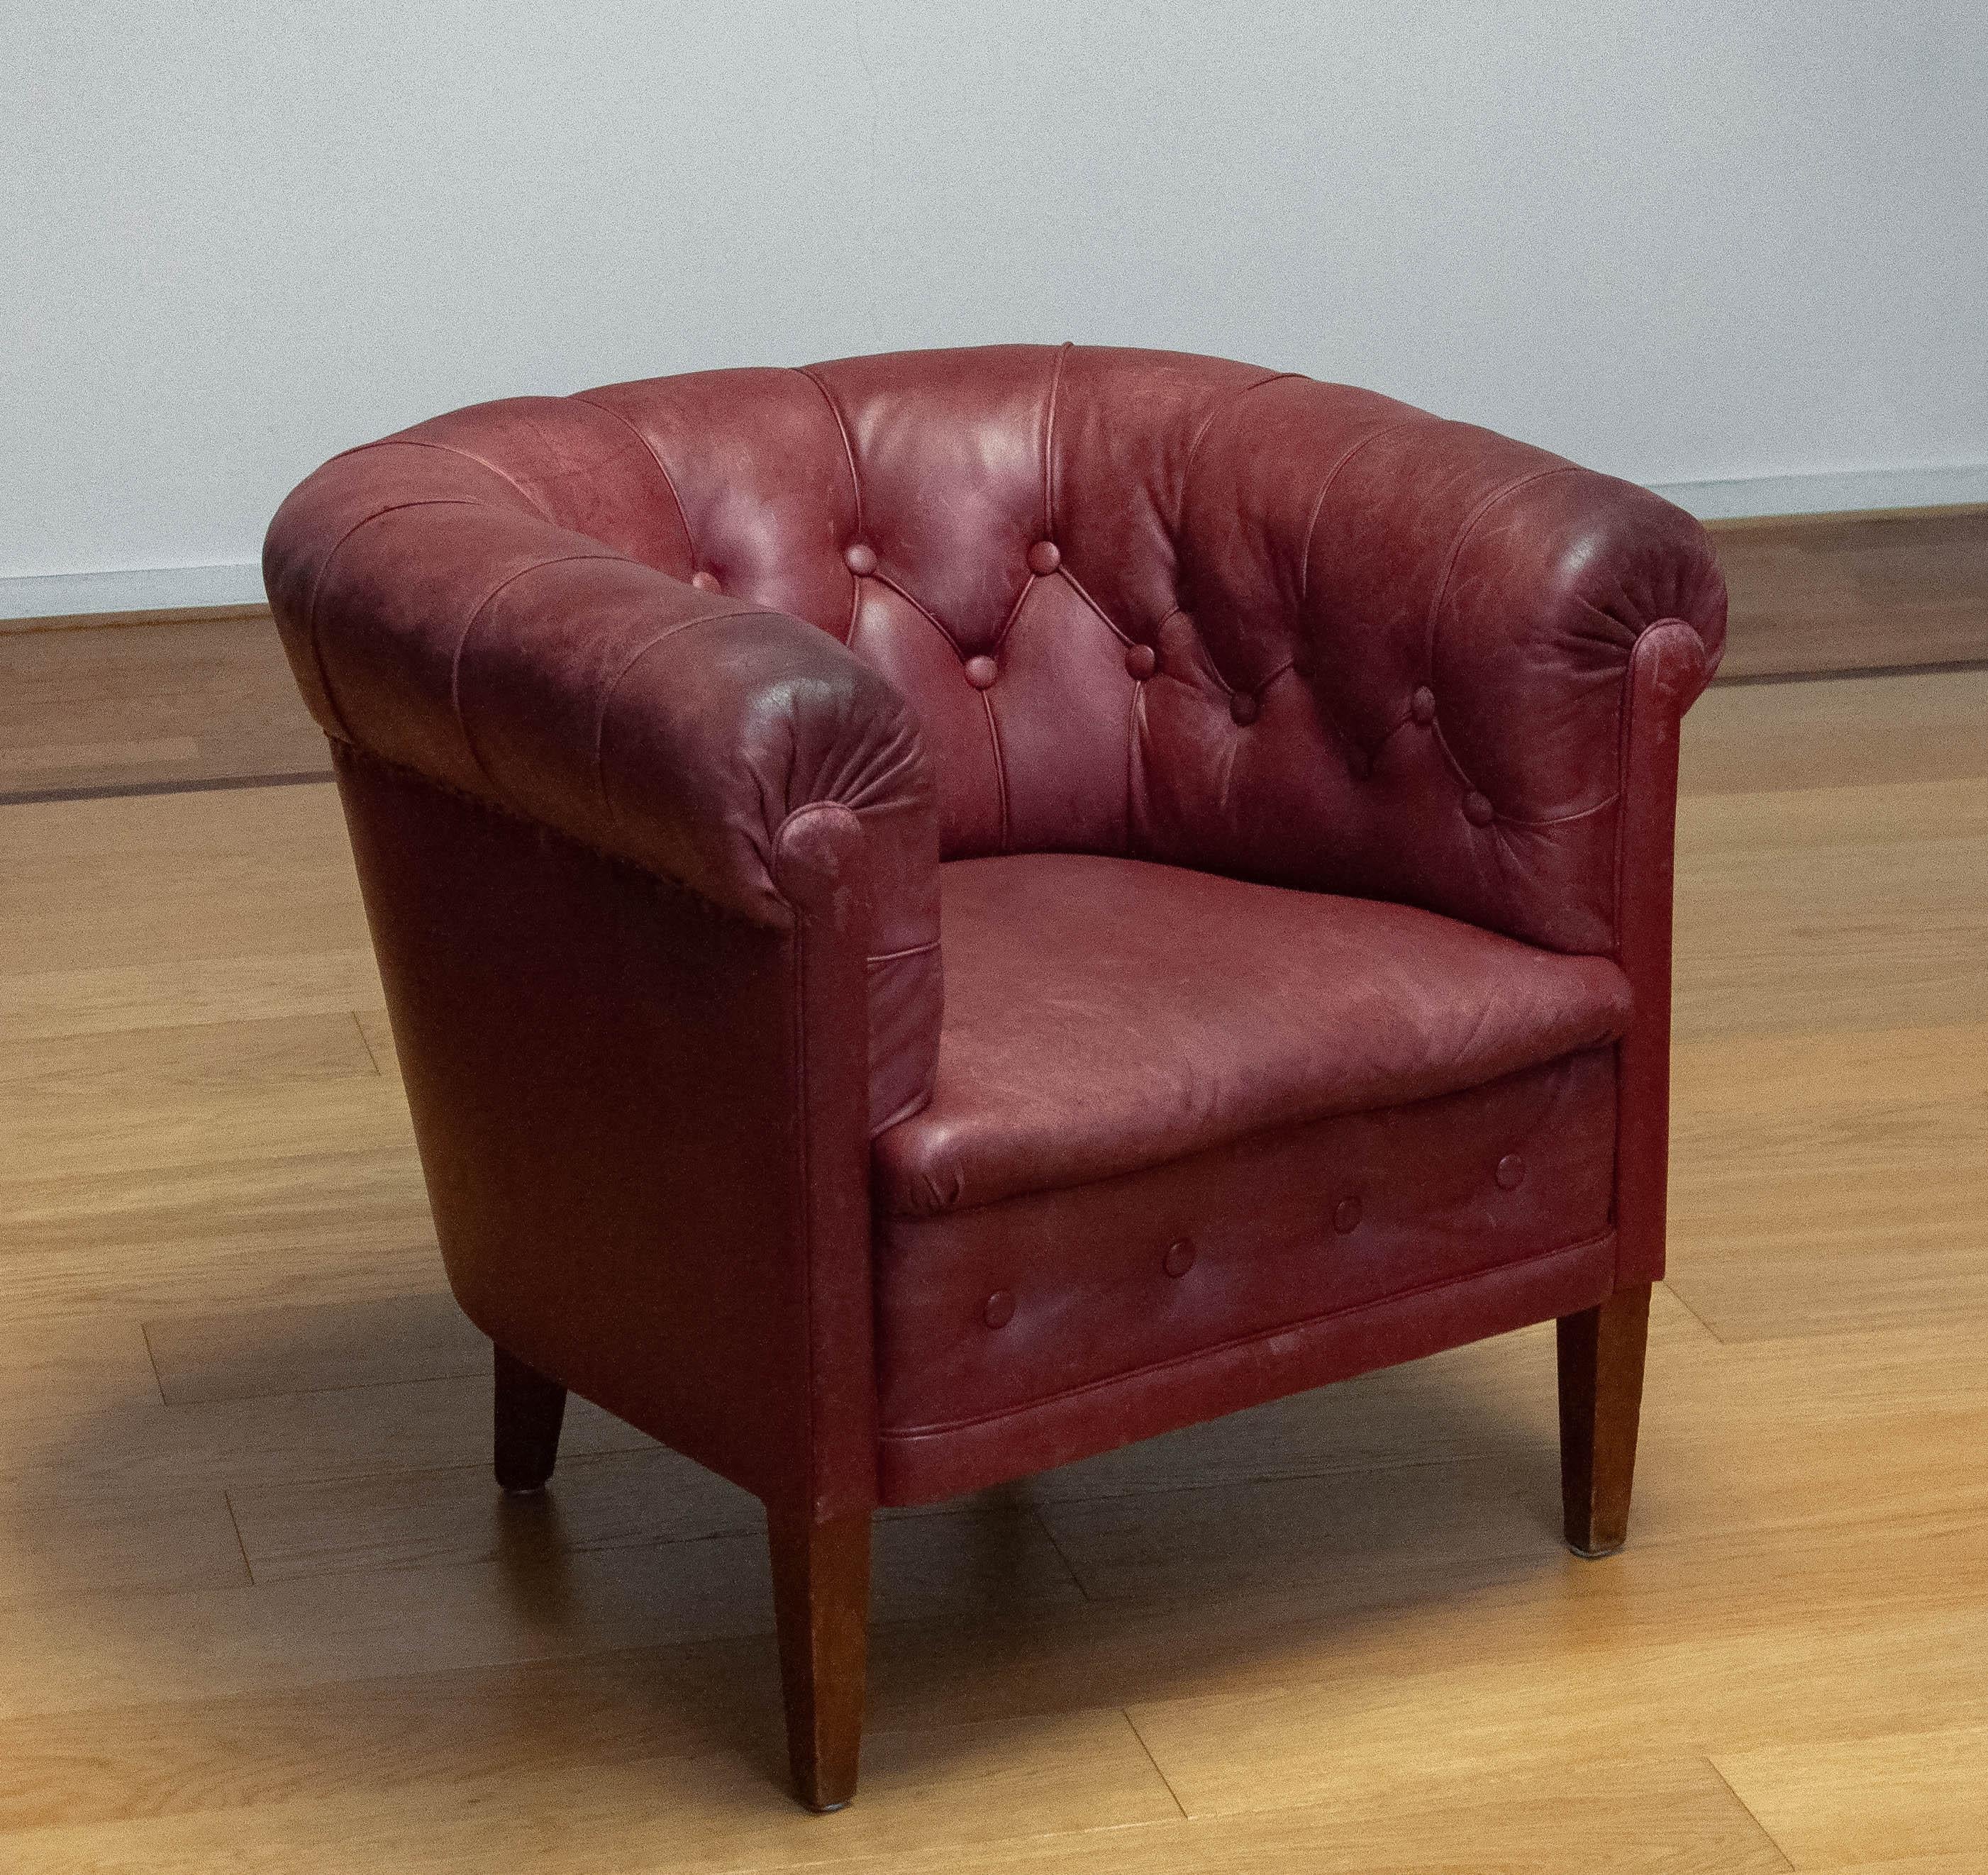 beautiful crimson red club chair made in the 1930s in Sweden. The chair is stil in original condition and therefor the leather has a great patina true the years. The condition of the leather is good and still very smooth. The springs, webbing as